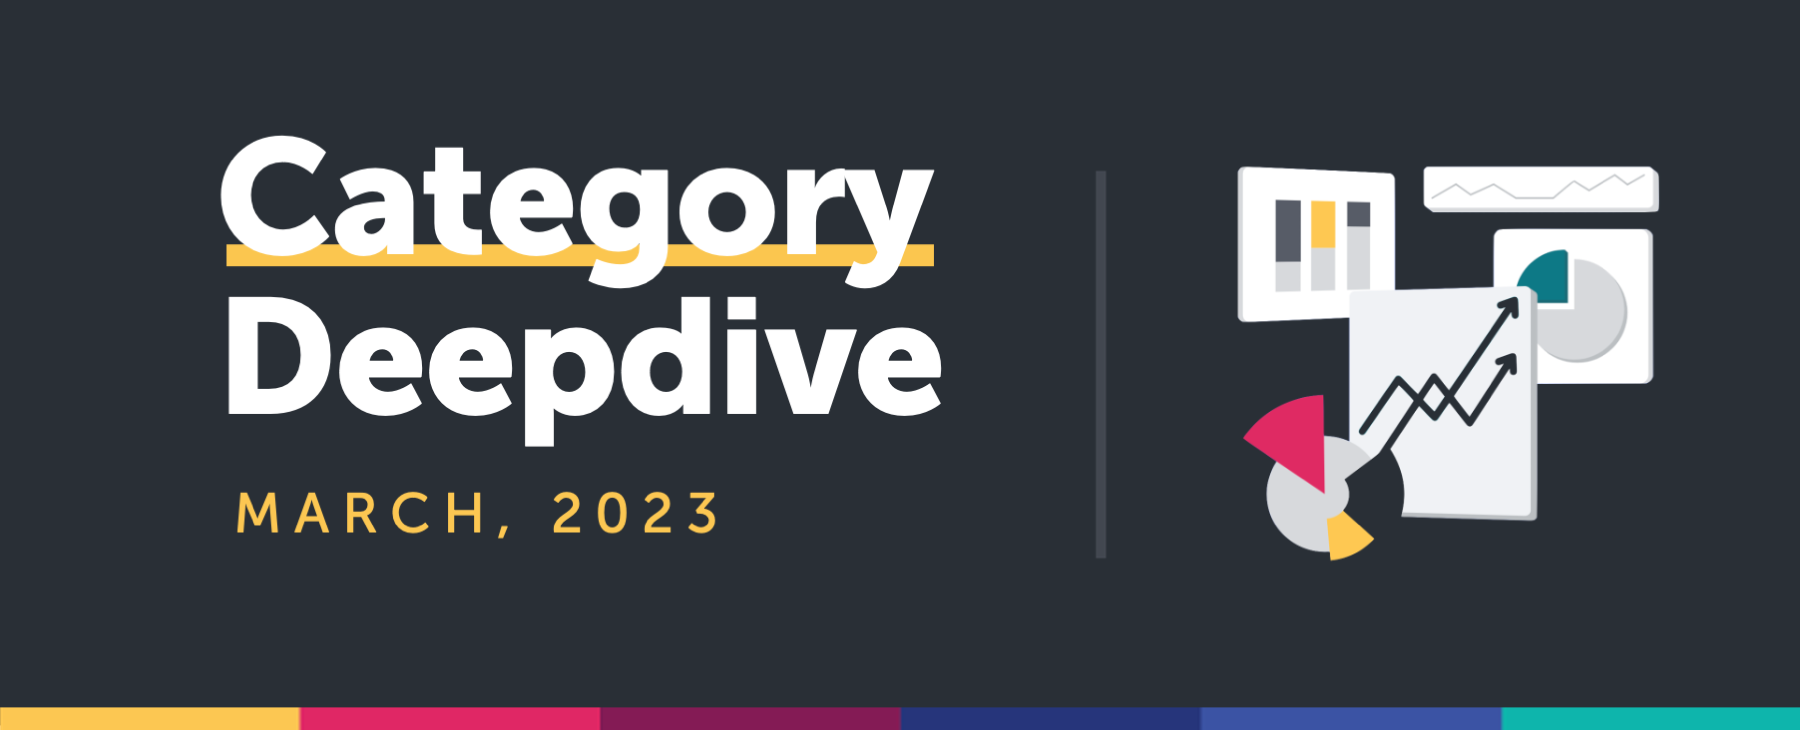 Category Deepdive: March 2023